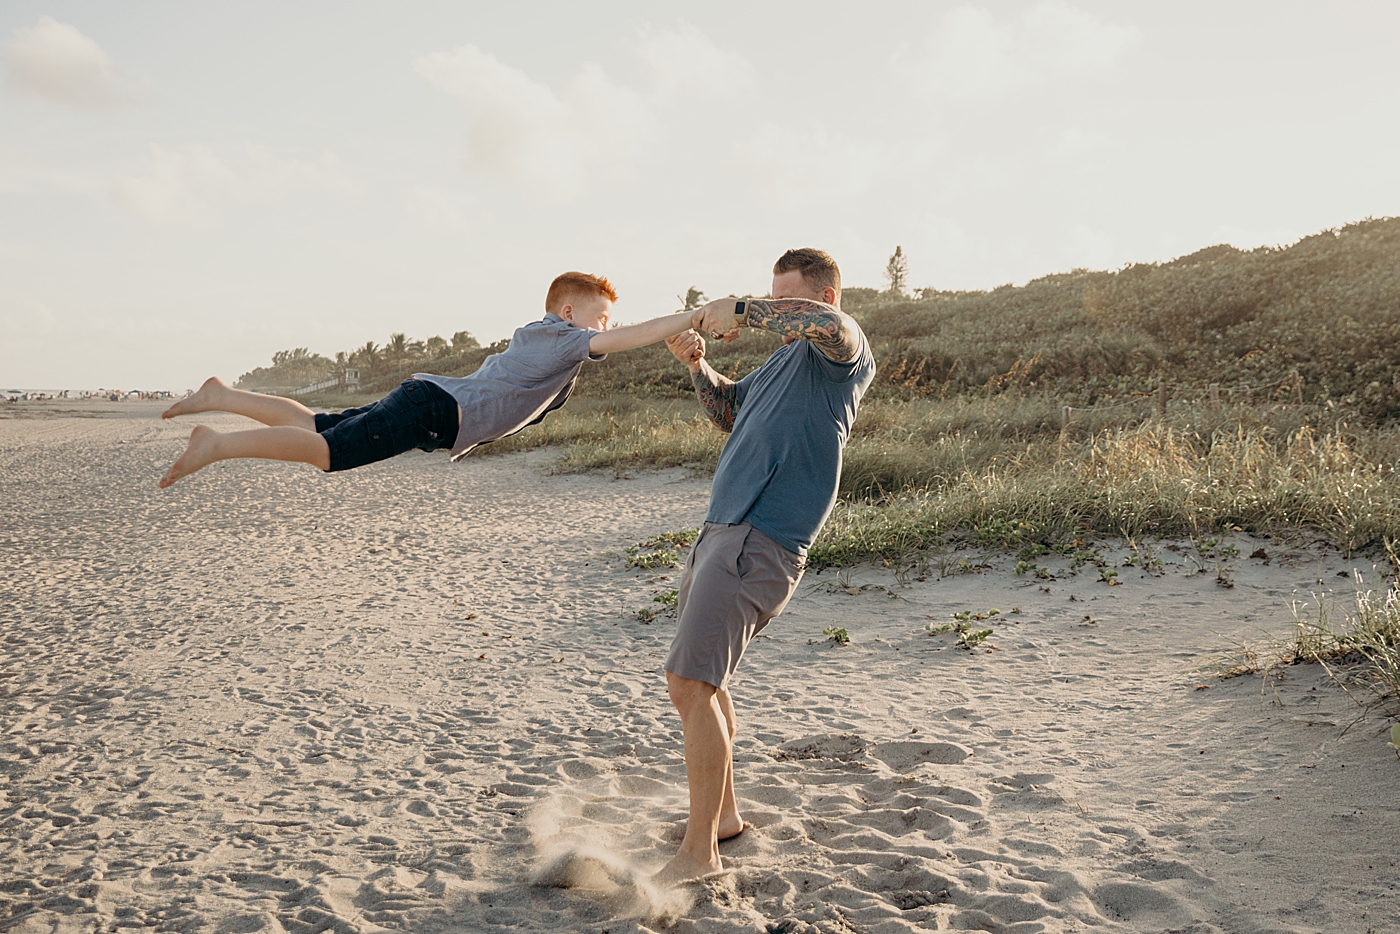 Dad swinging son by the arms in the air on the beach Ocean Ridge Hammock Park Family Photography by South Florida Family Photographer Maggie Alvarez Photography